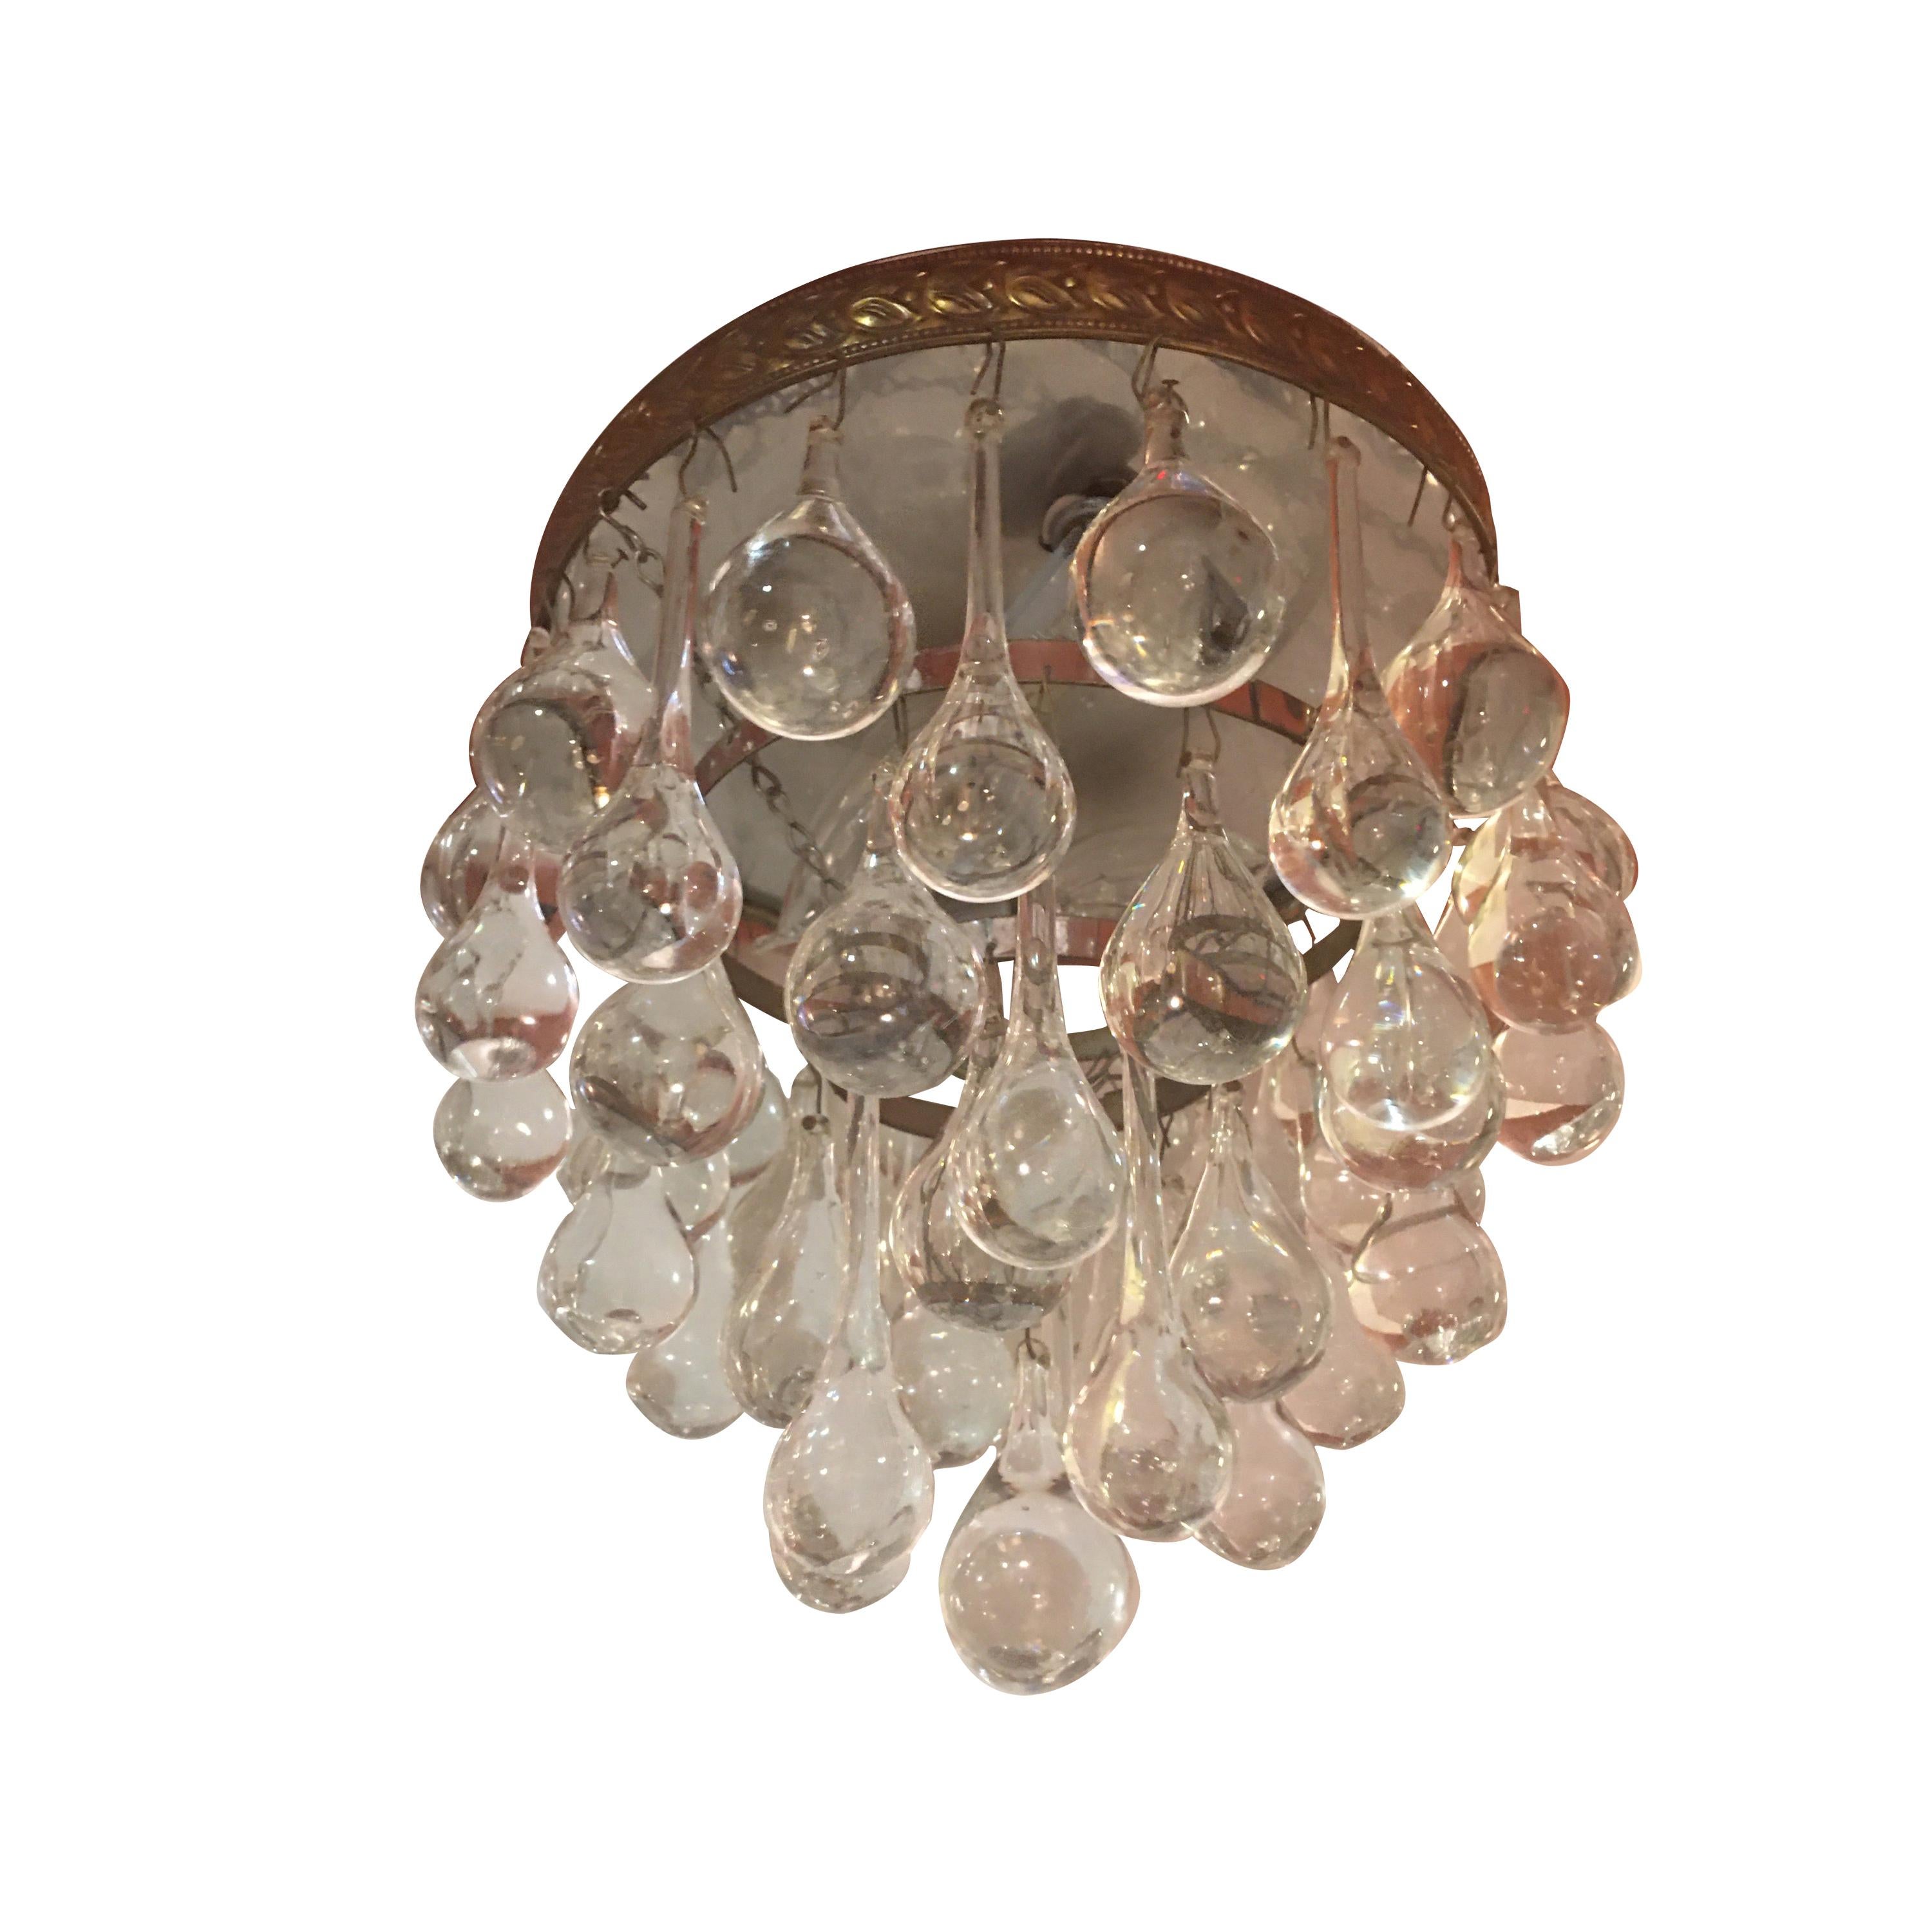 Small Tear Drop Ceiling Fixture 2 AVAILABLE! For Sale